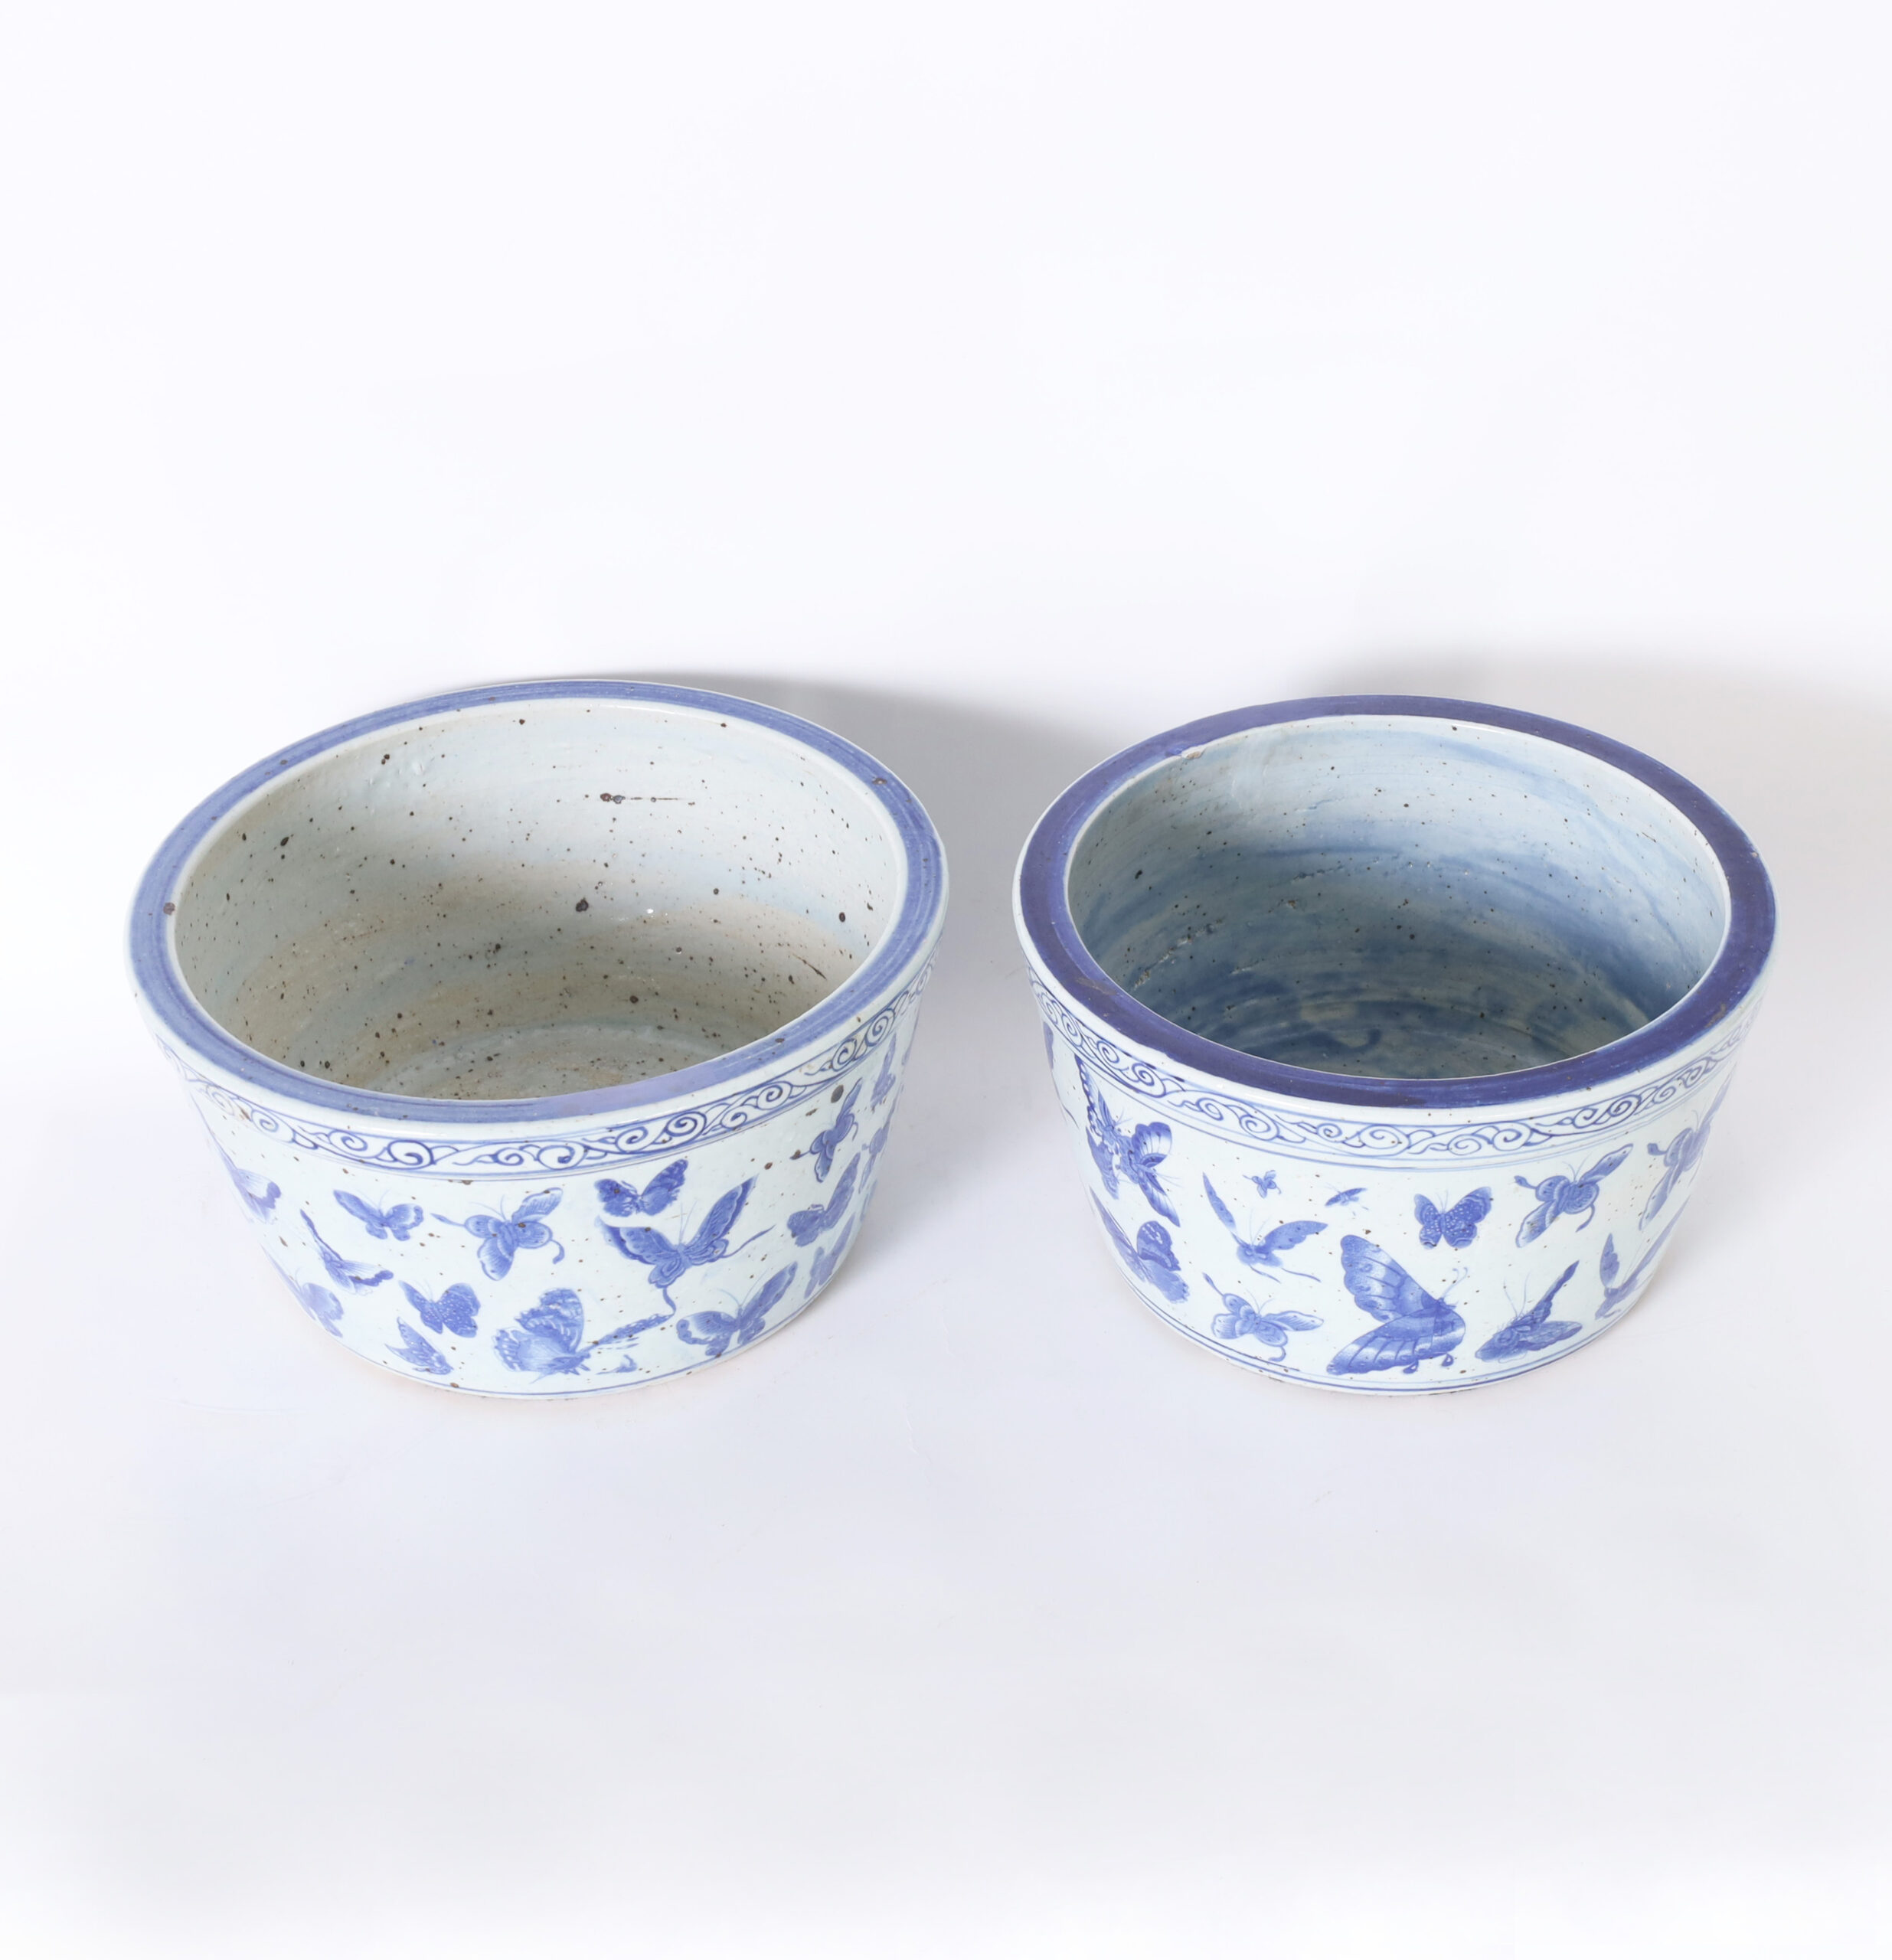 Pair of Chinese Blue and White Porcelain Bowls or Planters